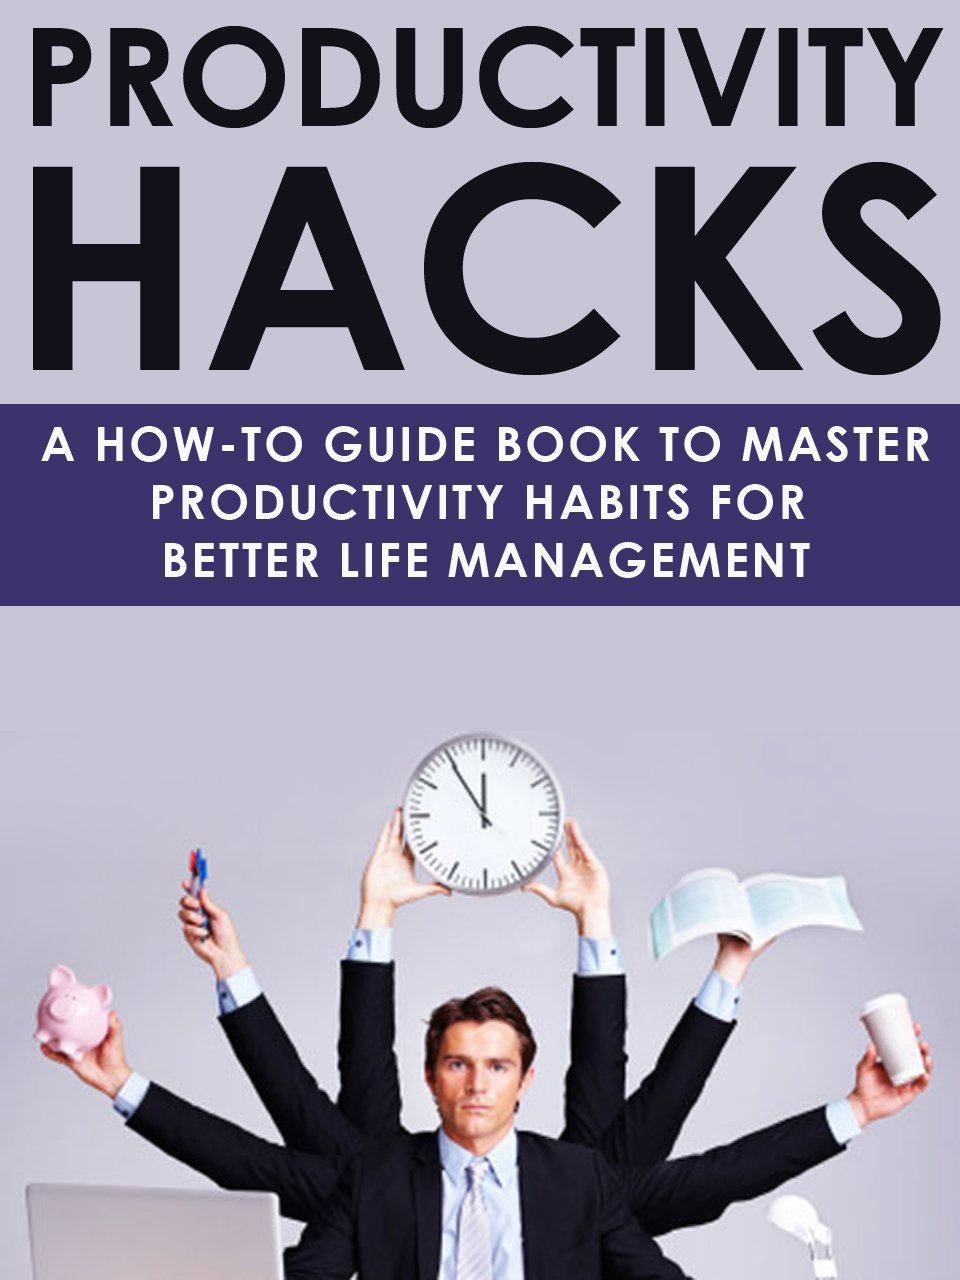 Productivity Hacks: A how-to guidebook to master productivity habits for better life management by Rohit Malhotra